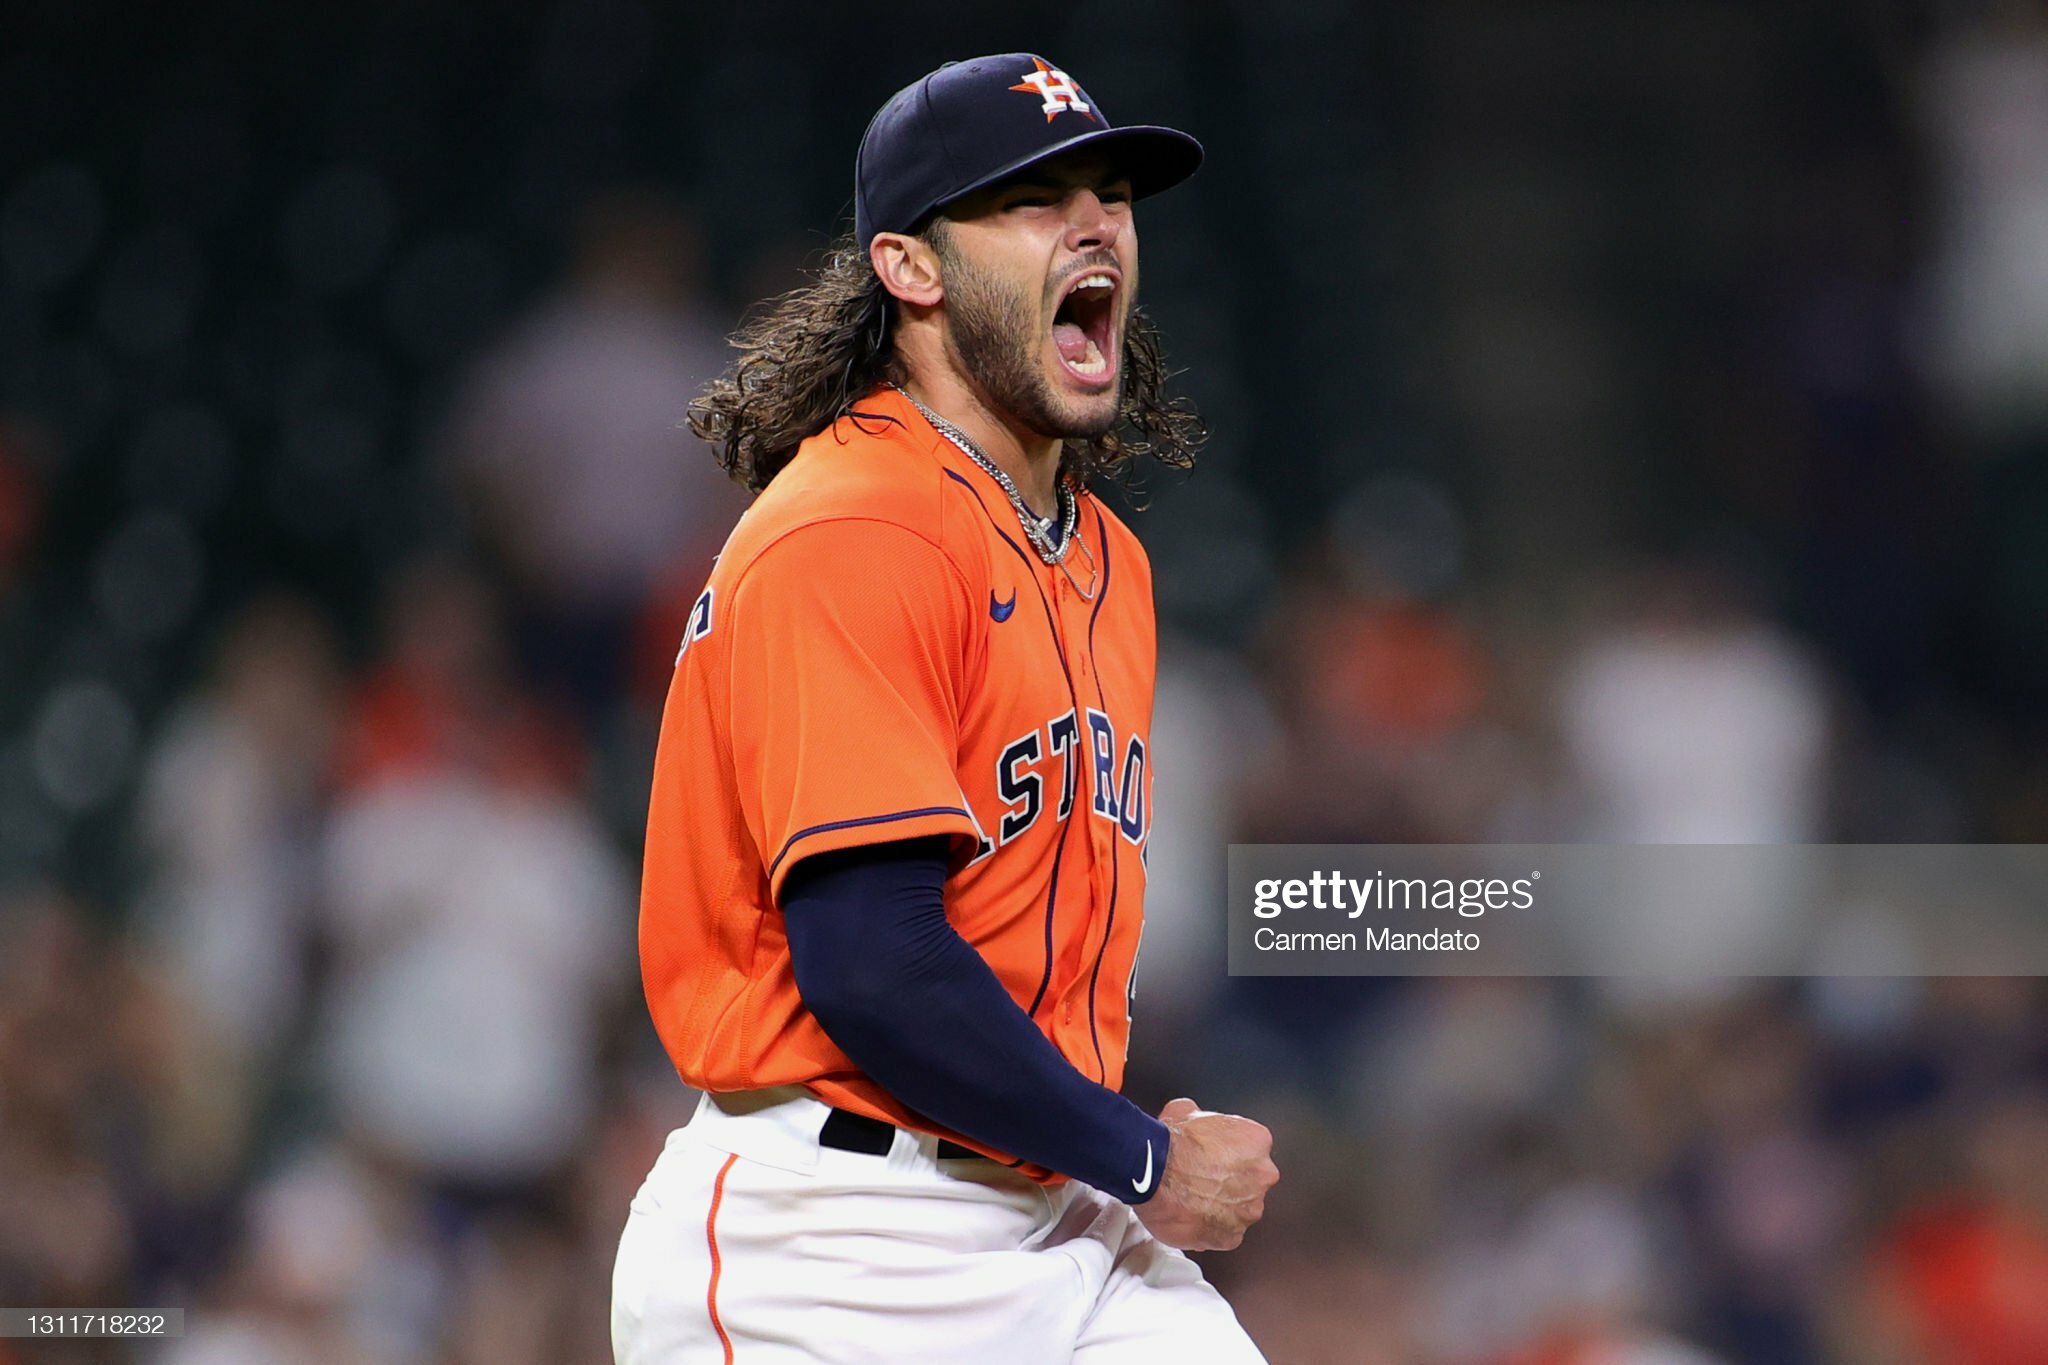 Houston pitcher Lance McCullers tweets displeasure about Rangers